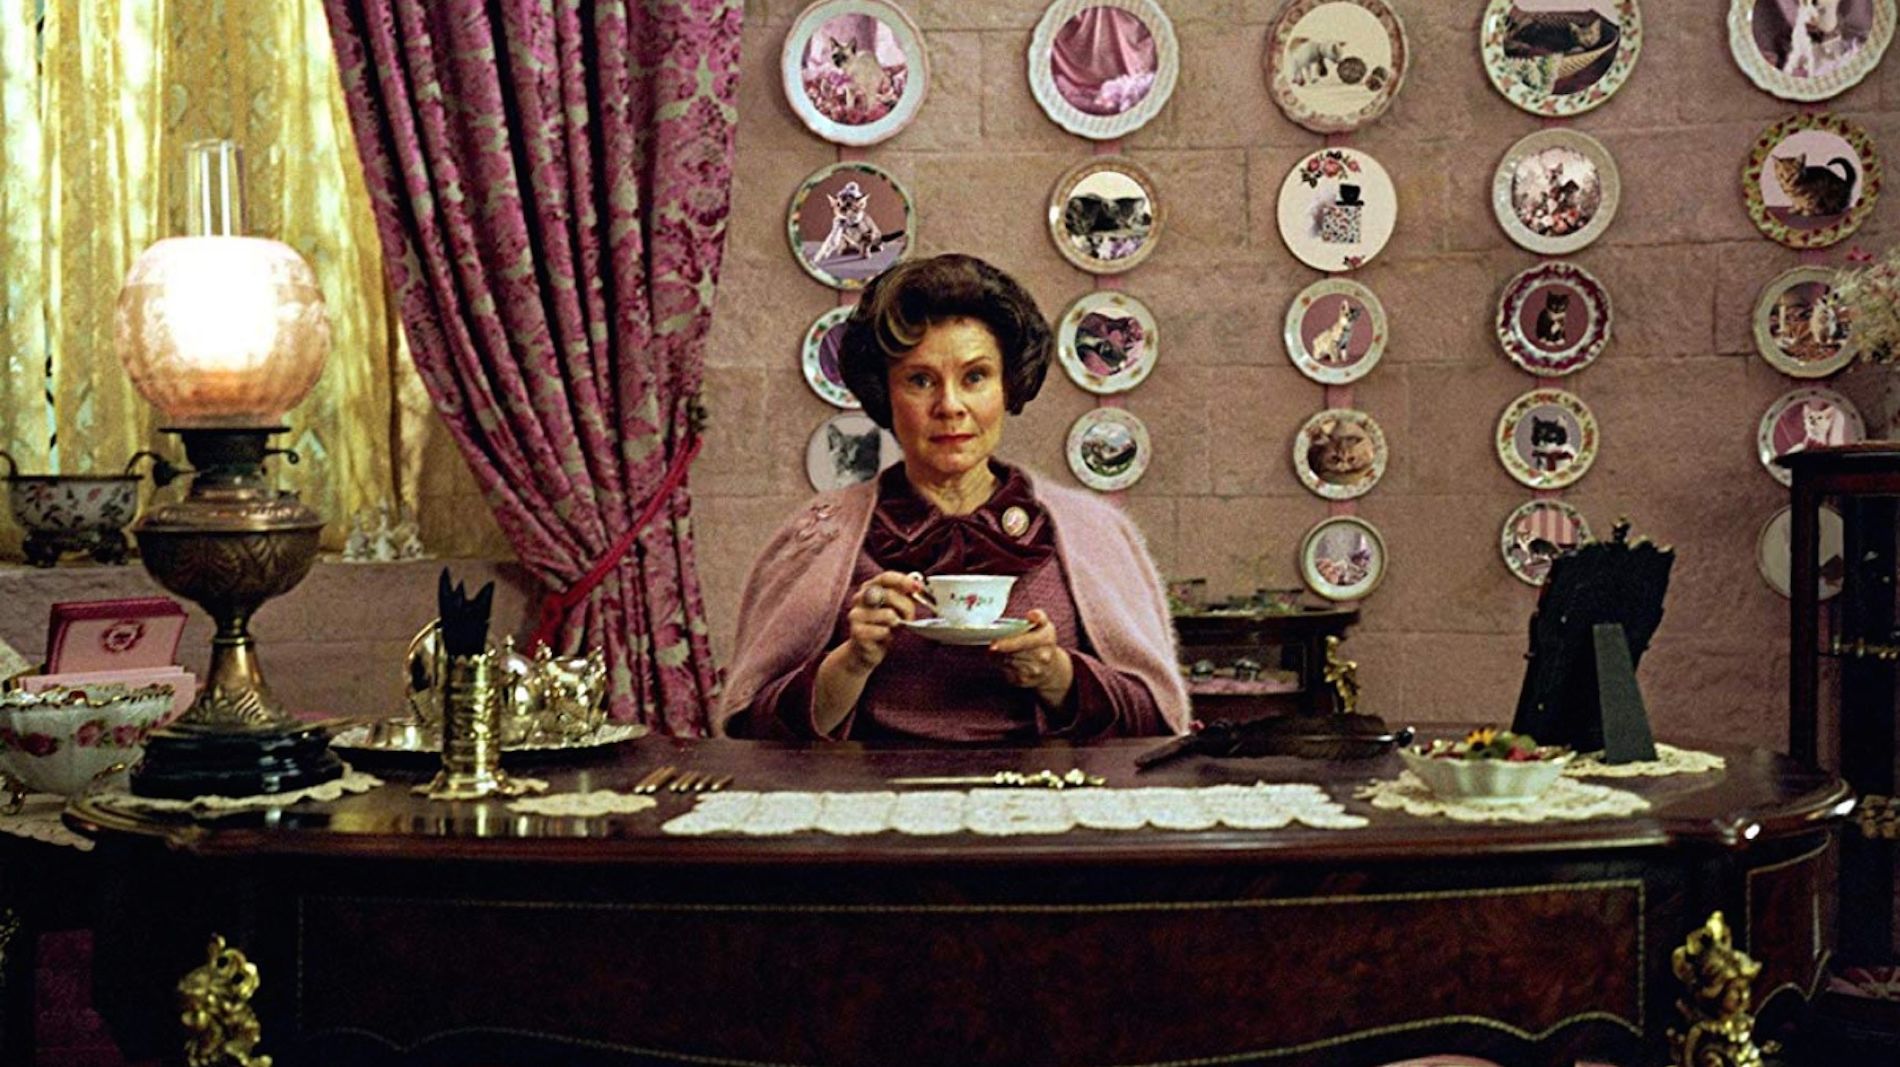 Dolores Umbridge From Harry Potter Was Based on a Real Person | Mental Floss1900 x 1067